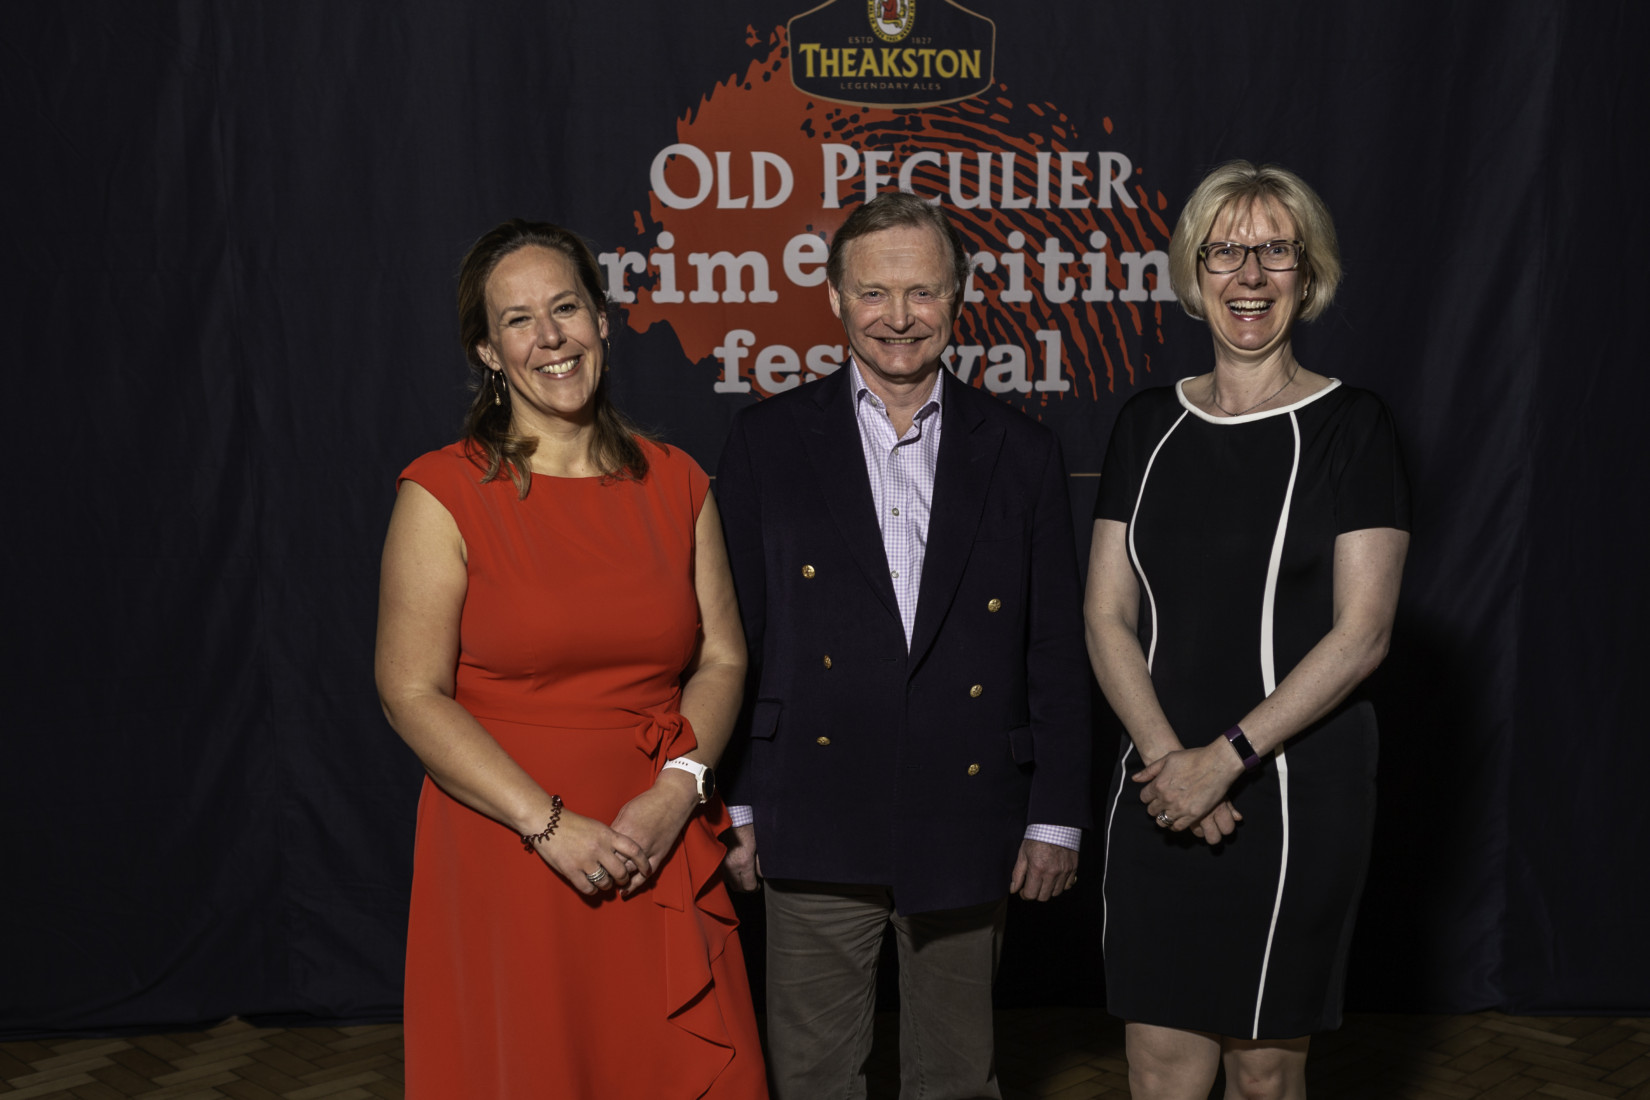 Sharon Canavar and Fiona Movley of Harrogate International Festivals and Simon Theakston Charir of T& R Theakston